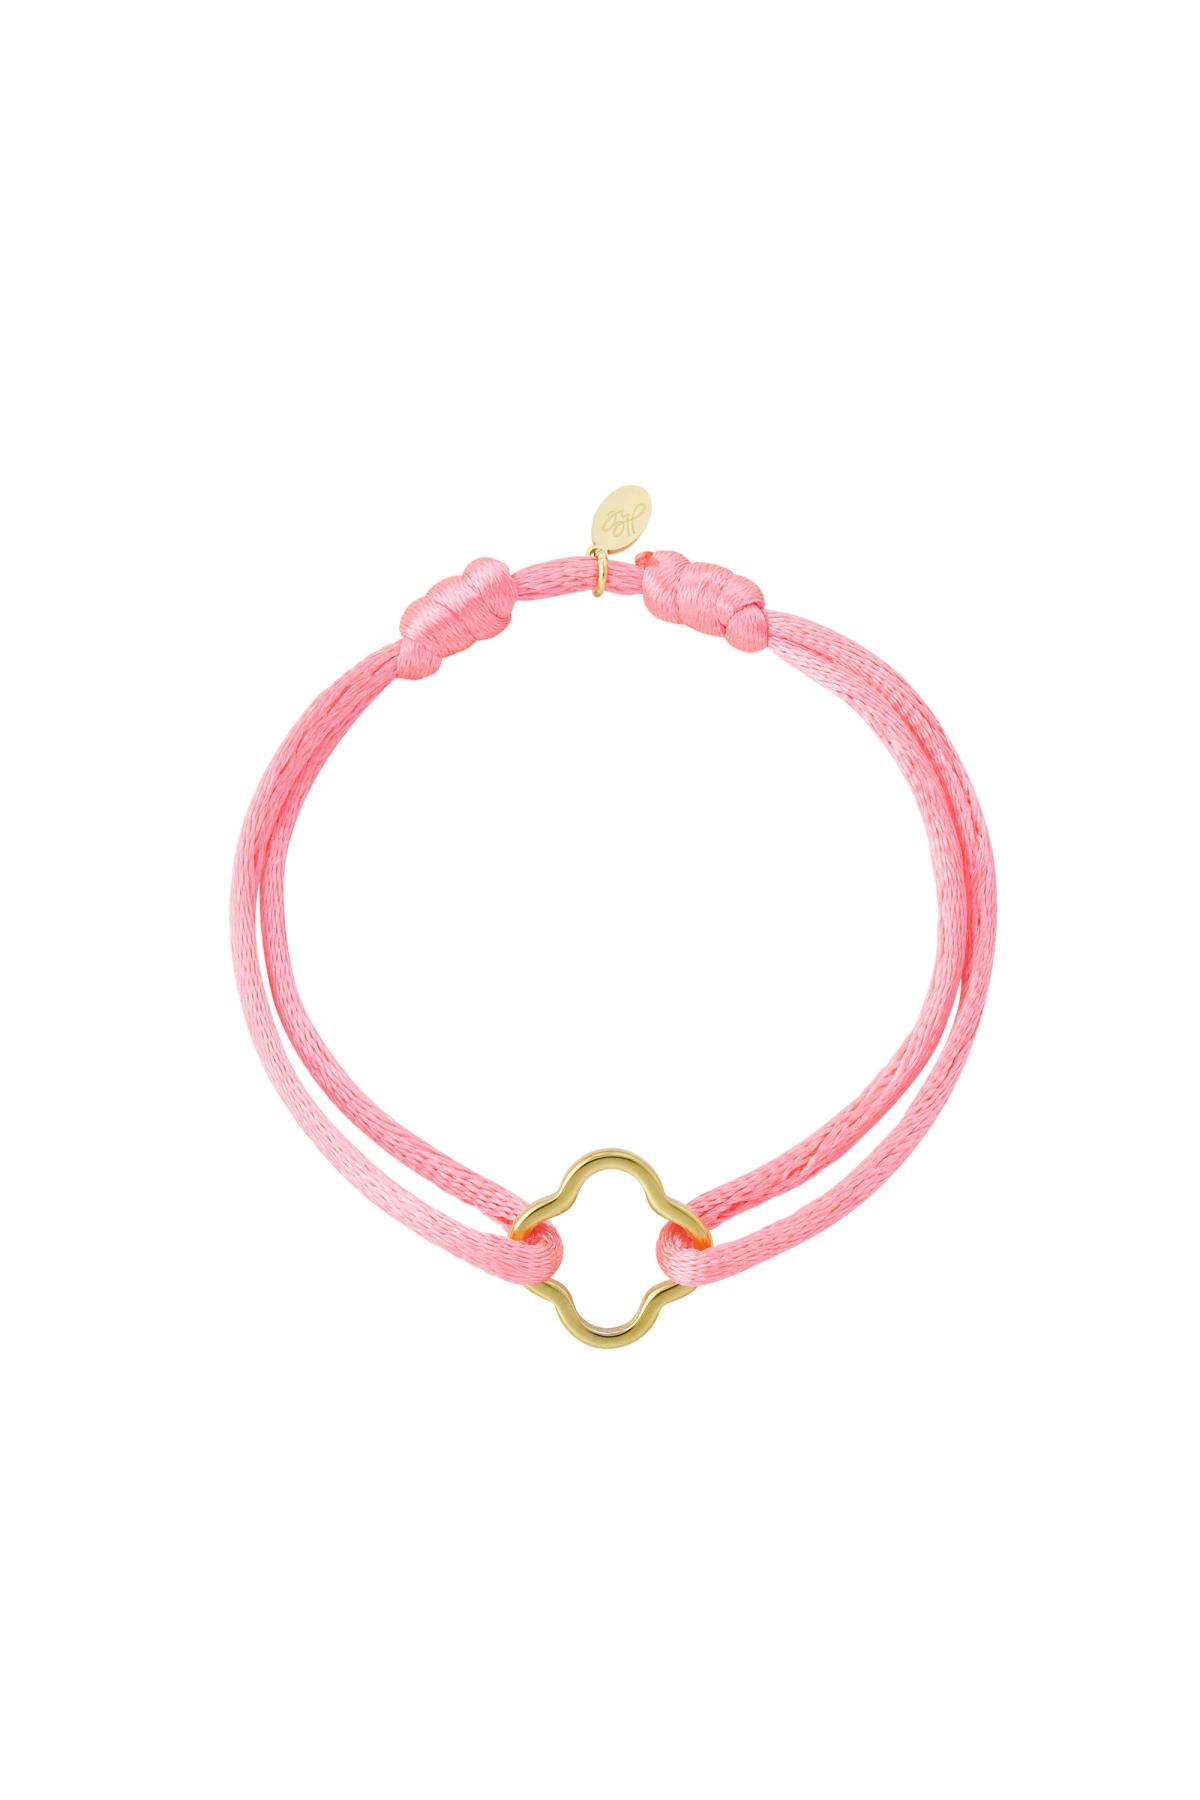 Fabric bracelet clover Pink Stainless Steel